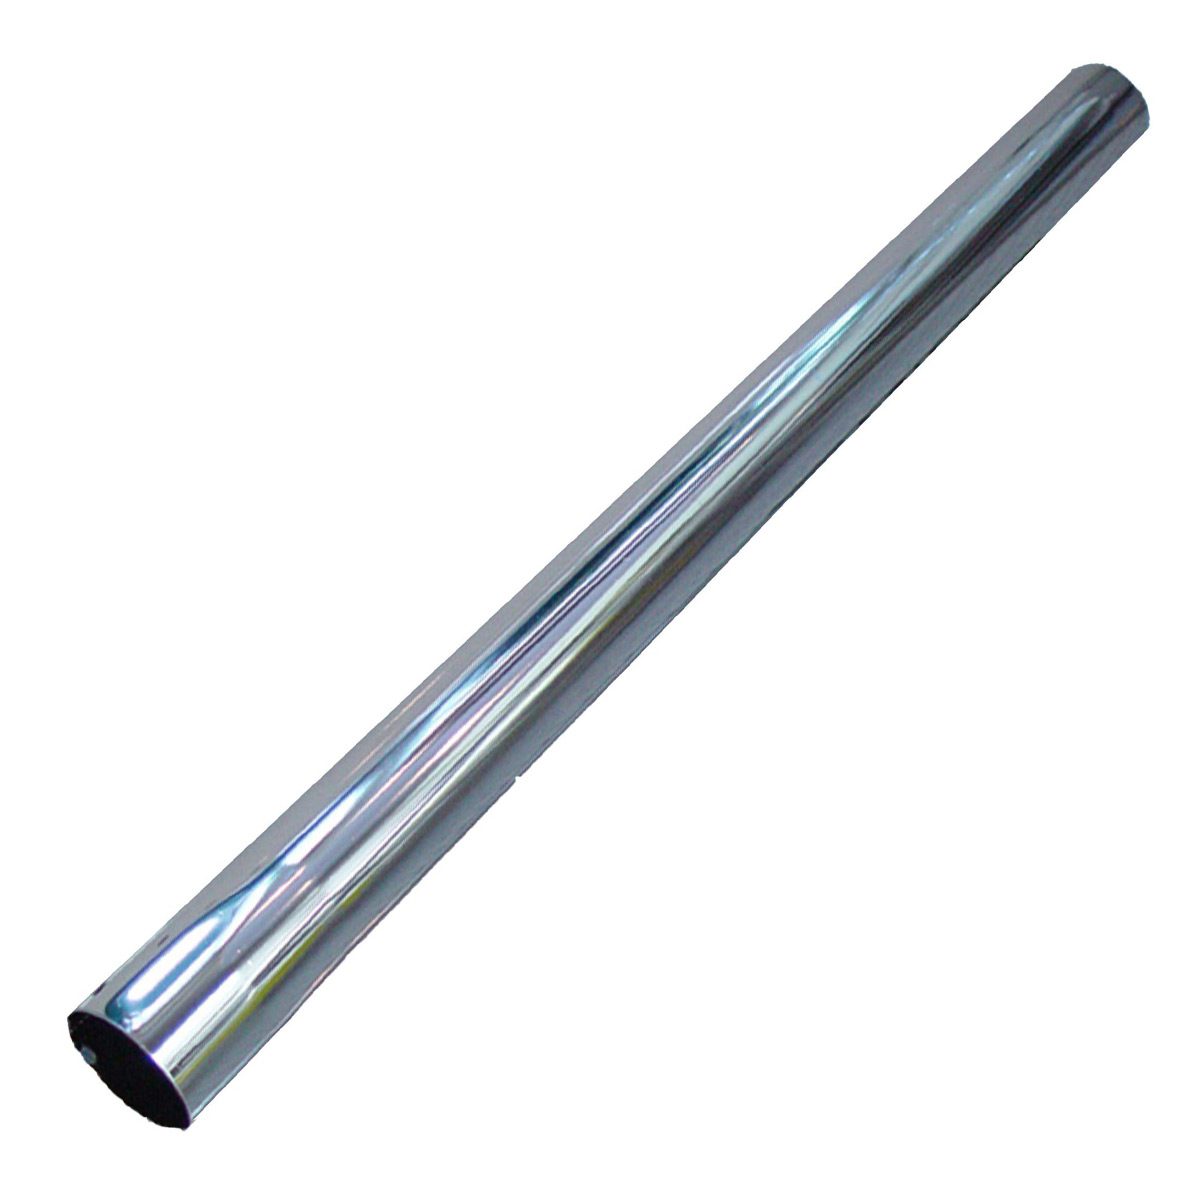 machinery-matting-spare-parts-chrome-vacuum-pipe-500mm-length-32mm-chrome-plated-vacuum-cleaner-wand-versatile-most-32mm-machines-electrolux-nilfisk-tellus-chrome-plated-pipe-vjs-distributors-80214